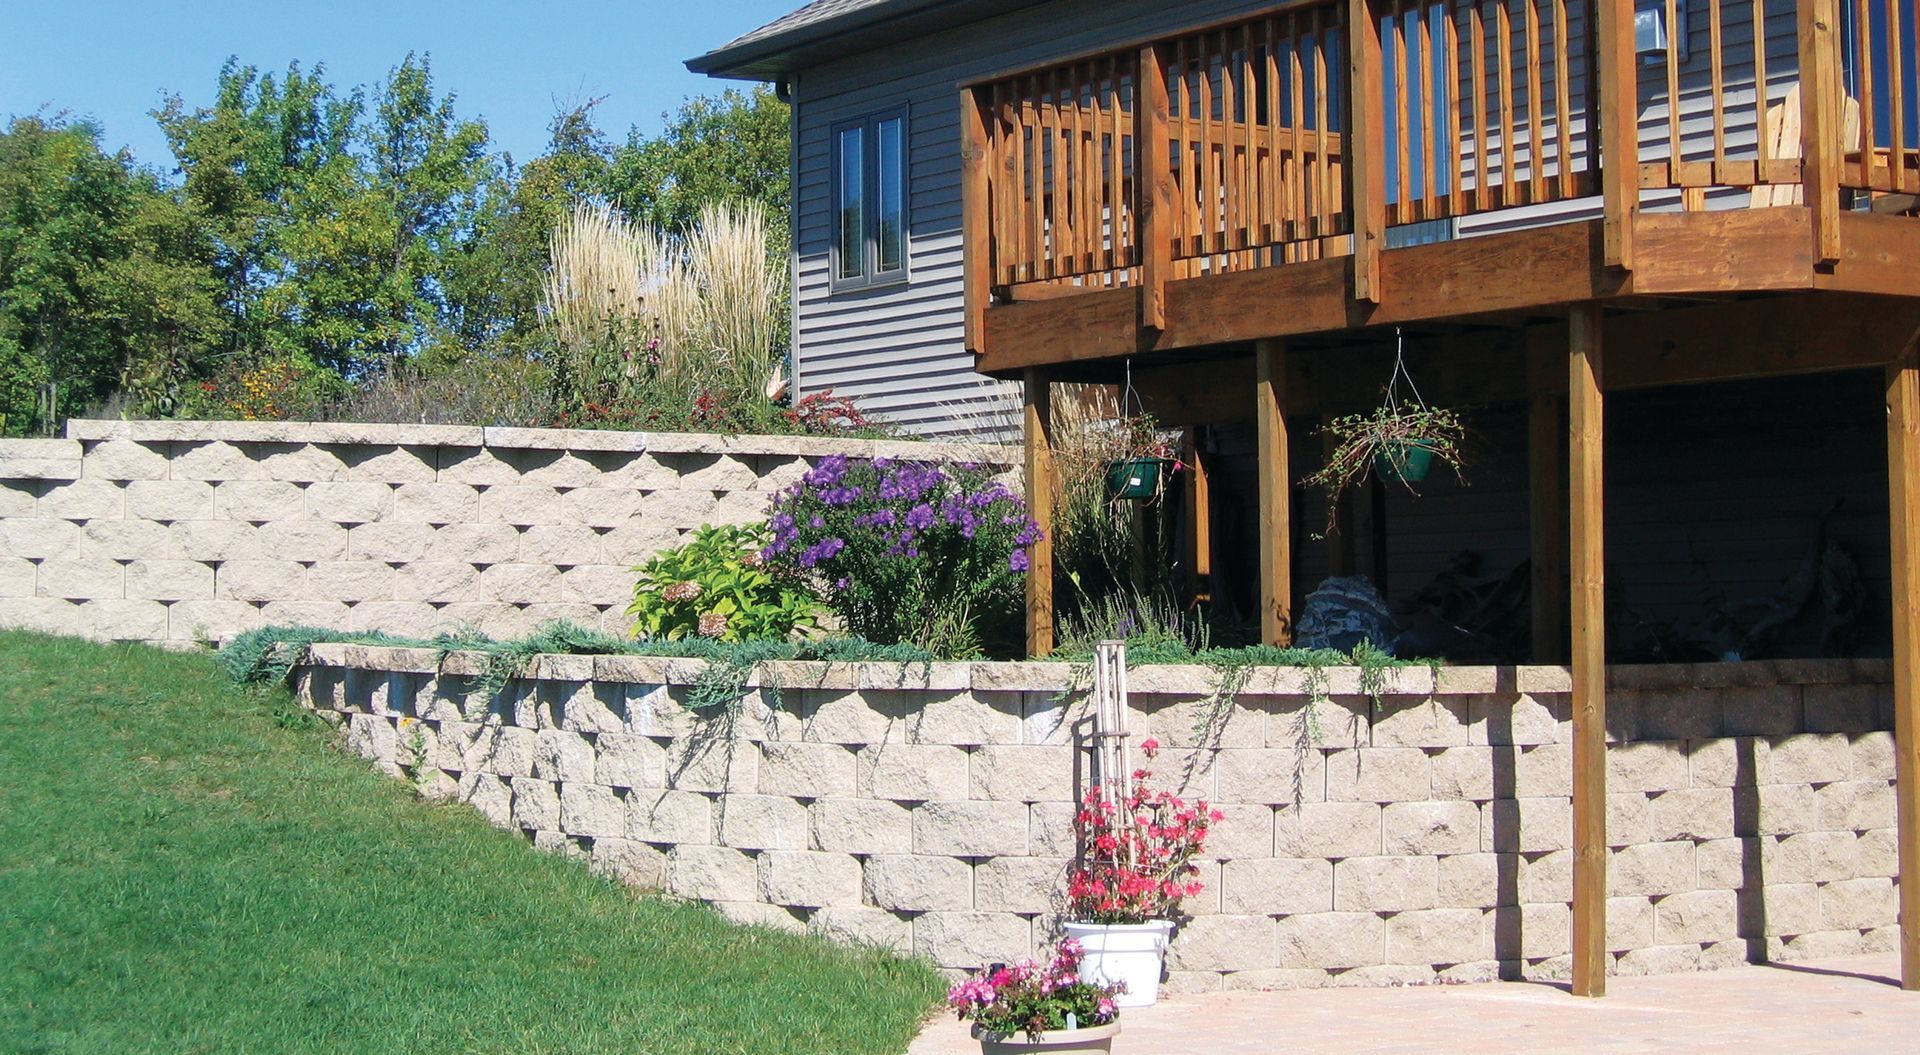 At Stockmans Stoneworks, We Build Retaining Walls That Last in Mid-Missouri.